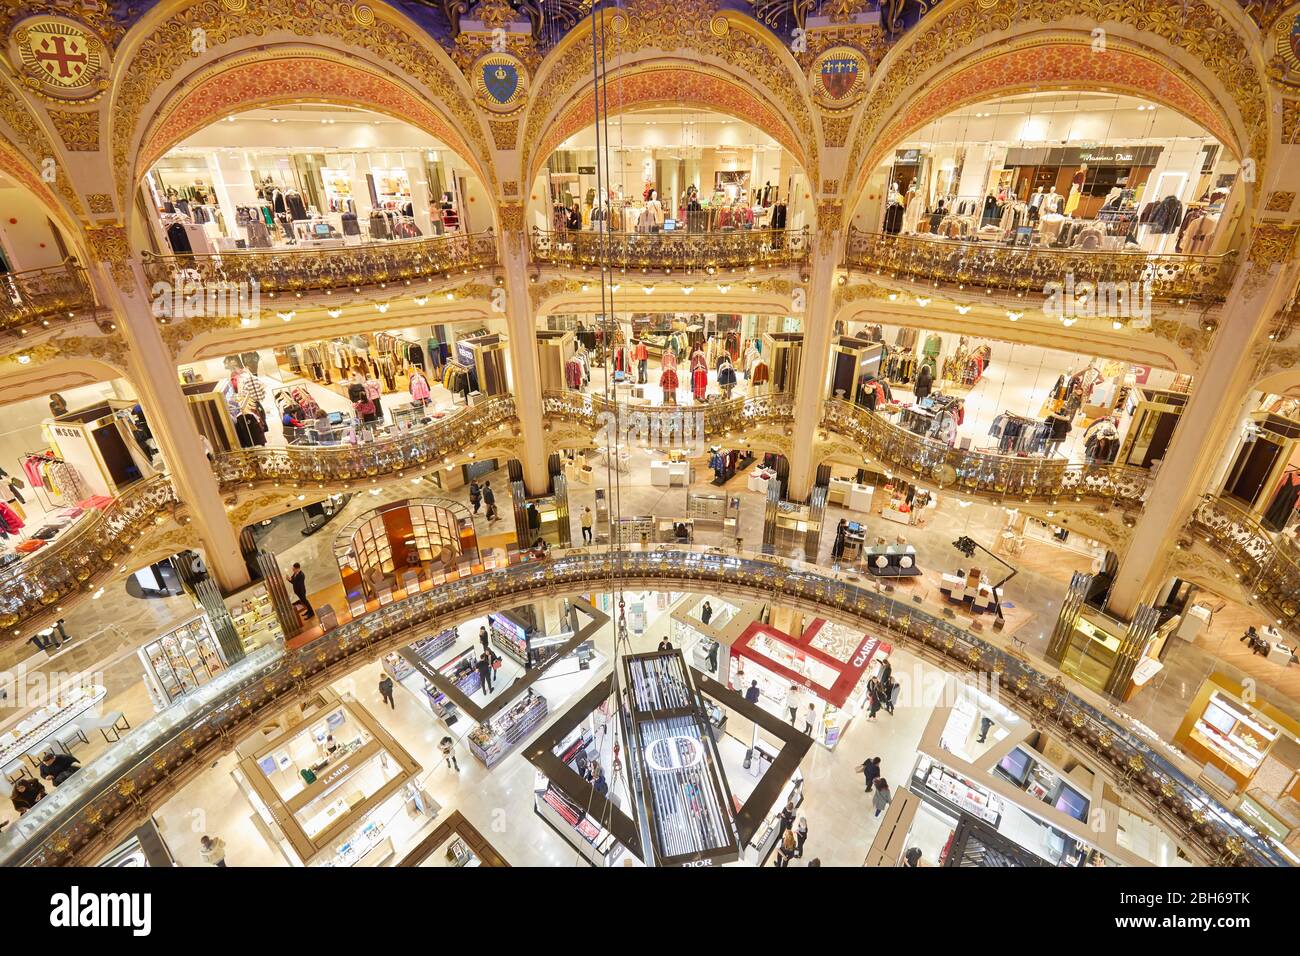 PARIS - NOVEMBER 6, 2019: Galeries Lafayette interior in Paris, high angle view with ancient arcades Stock Photo